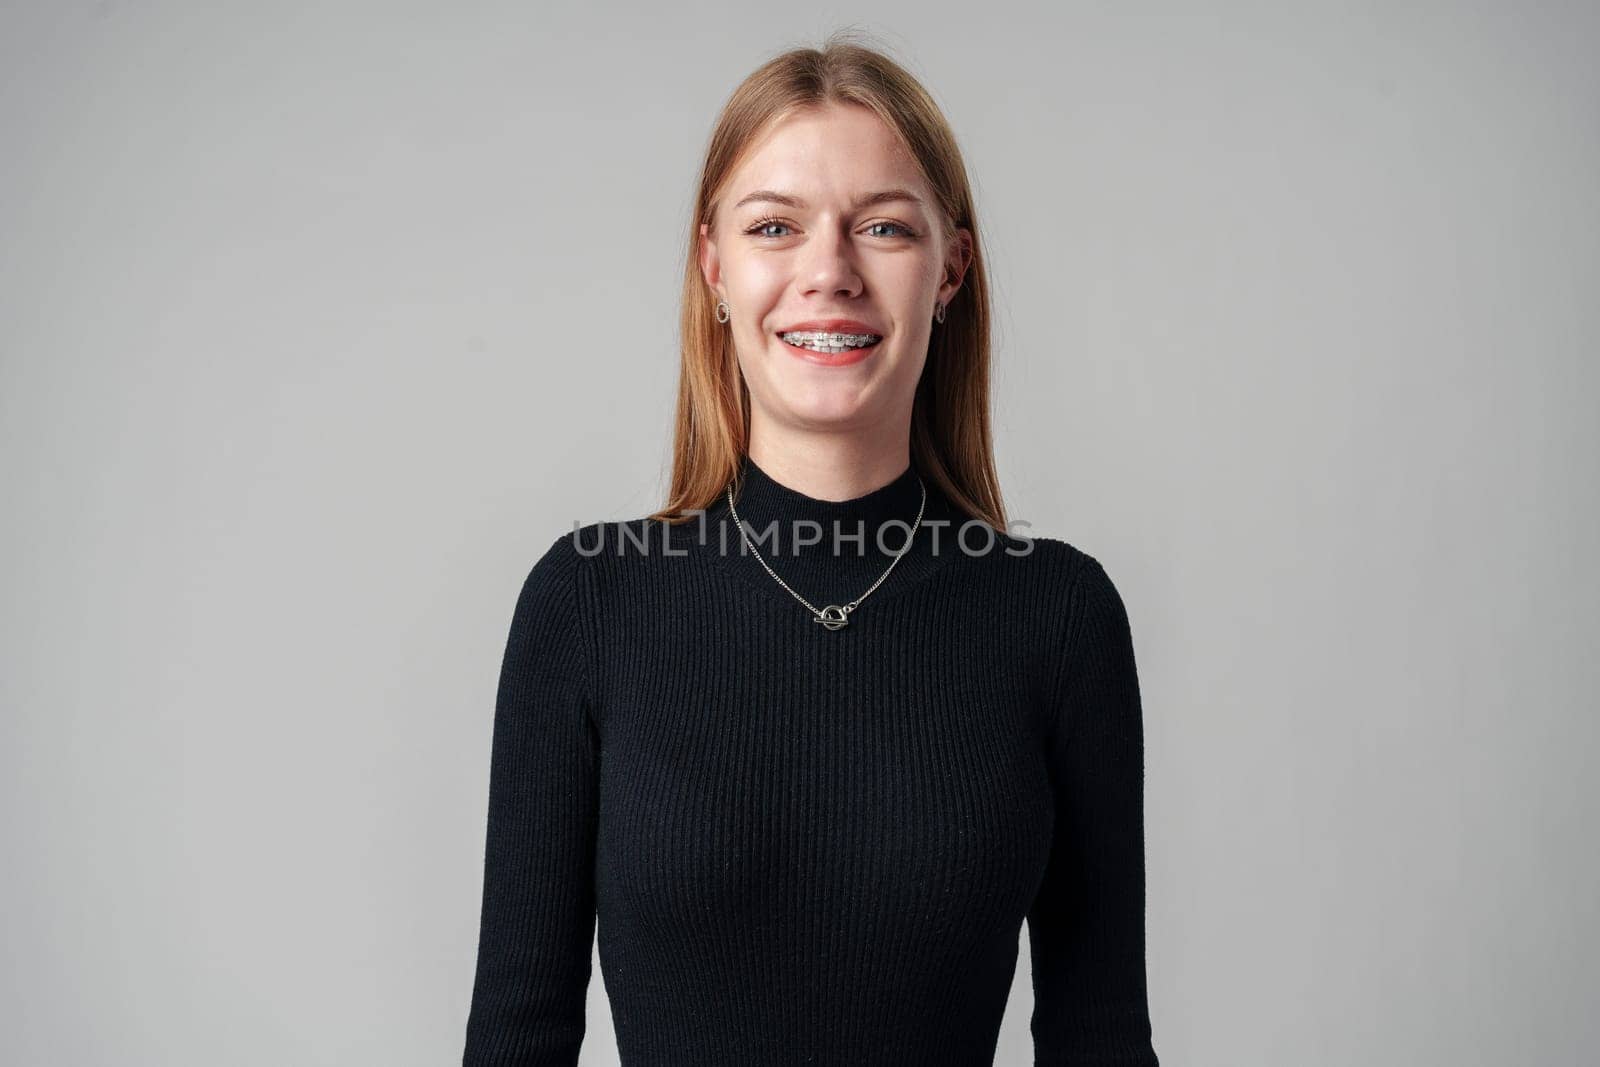 Smiling Woman in Black Top against gray background in studio